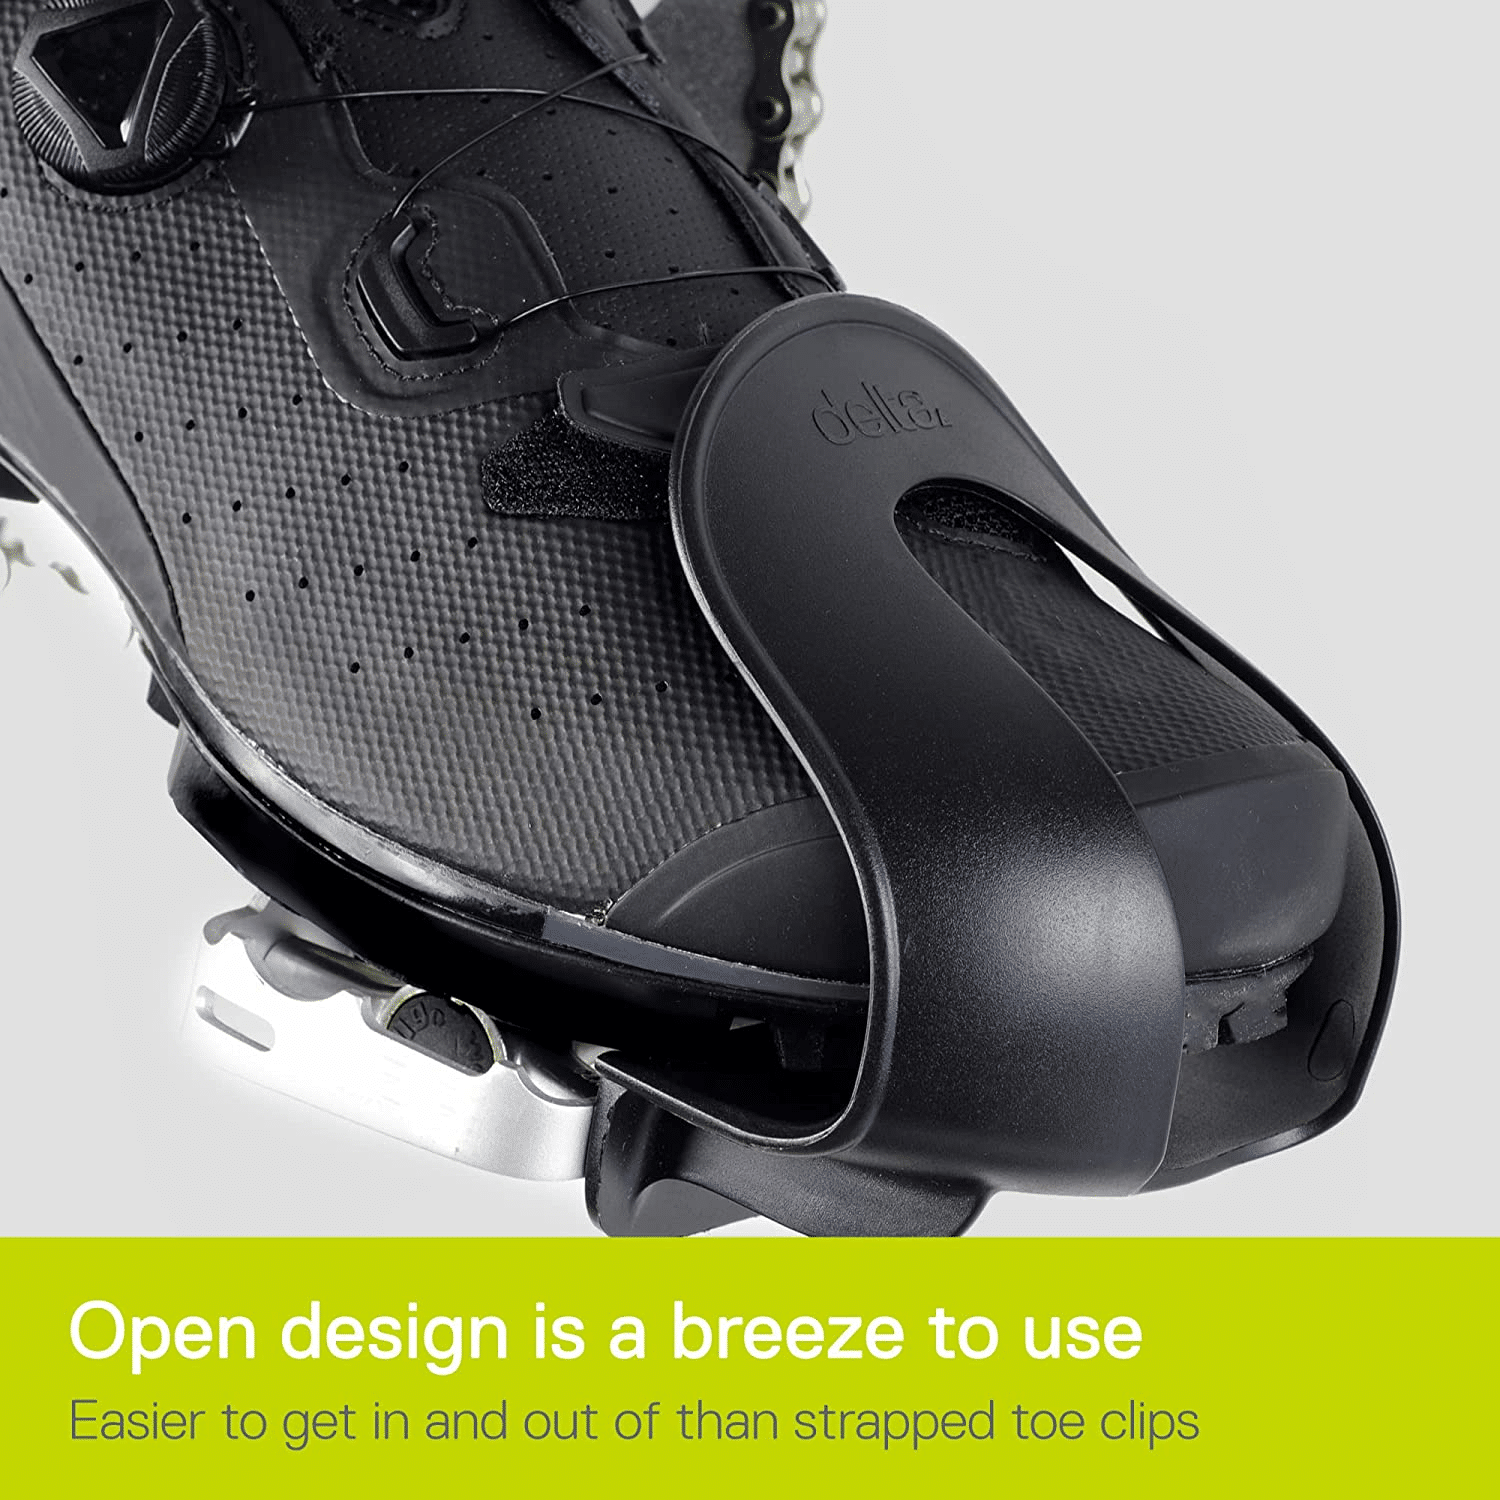 Strapless pedals like these are very easy to use and allow you to insert your feet and remove your feet safely.